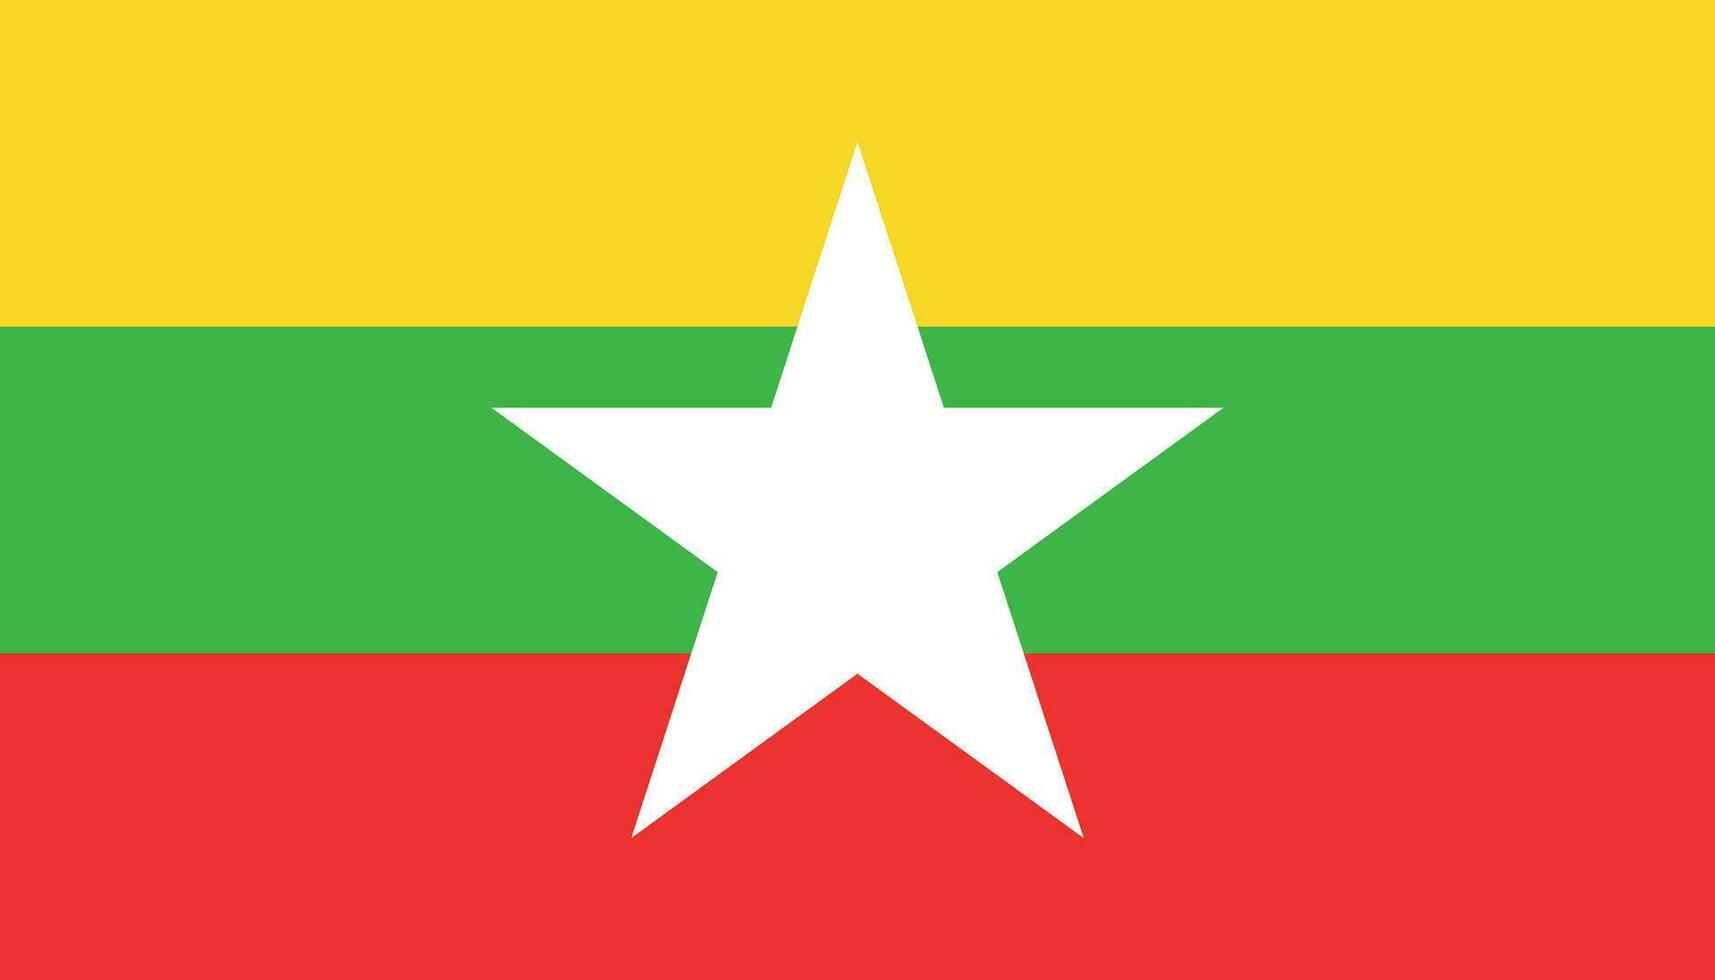 Myanmar flag icon in flat style. National sign vector illustration. Politic business concept.